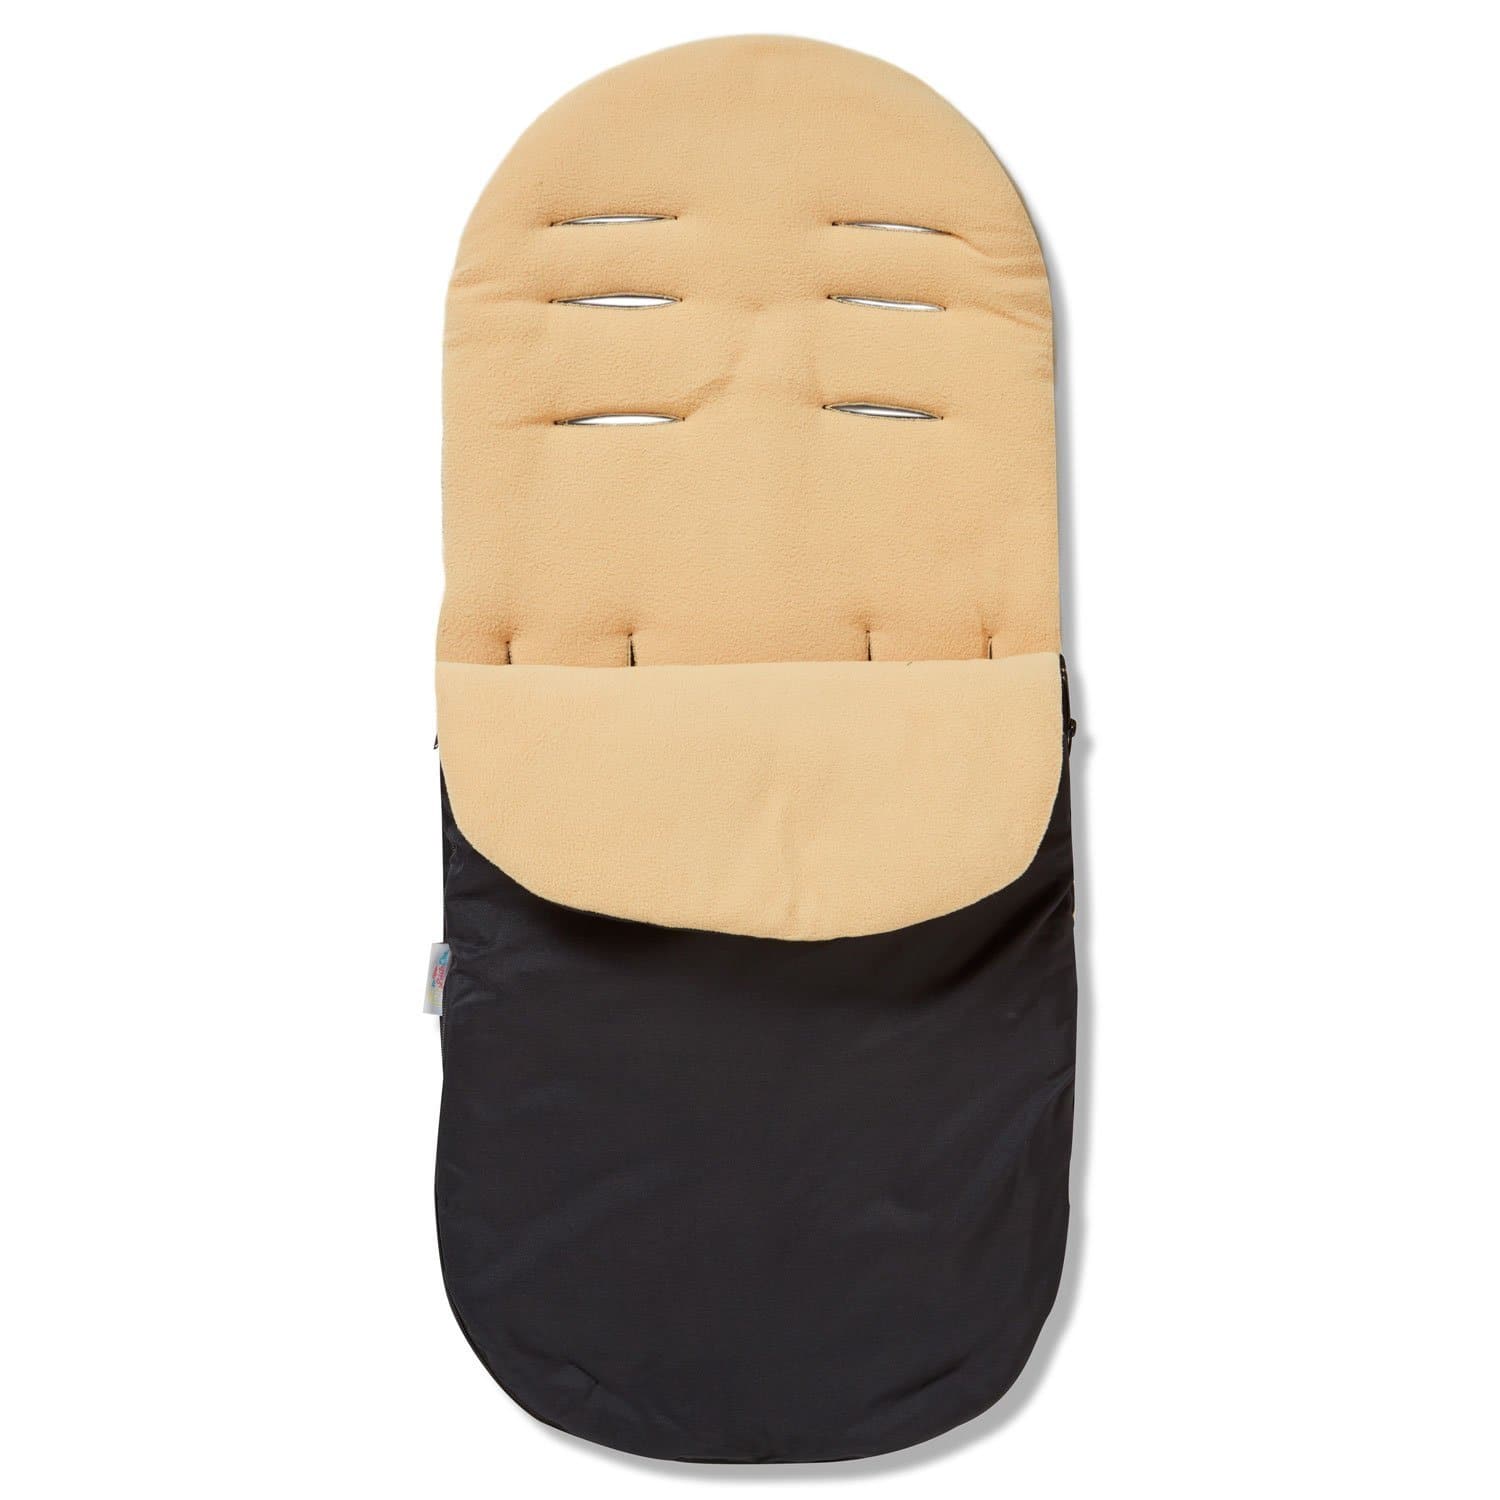 Footmuff / Cosy Toes Compatible with Silver Cross - Sand / Fits All Models | For Your Little One